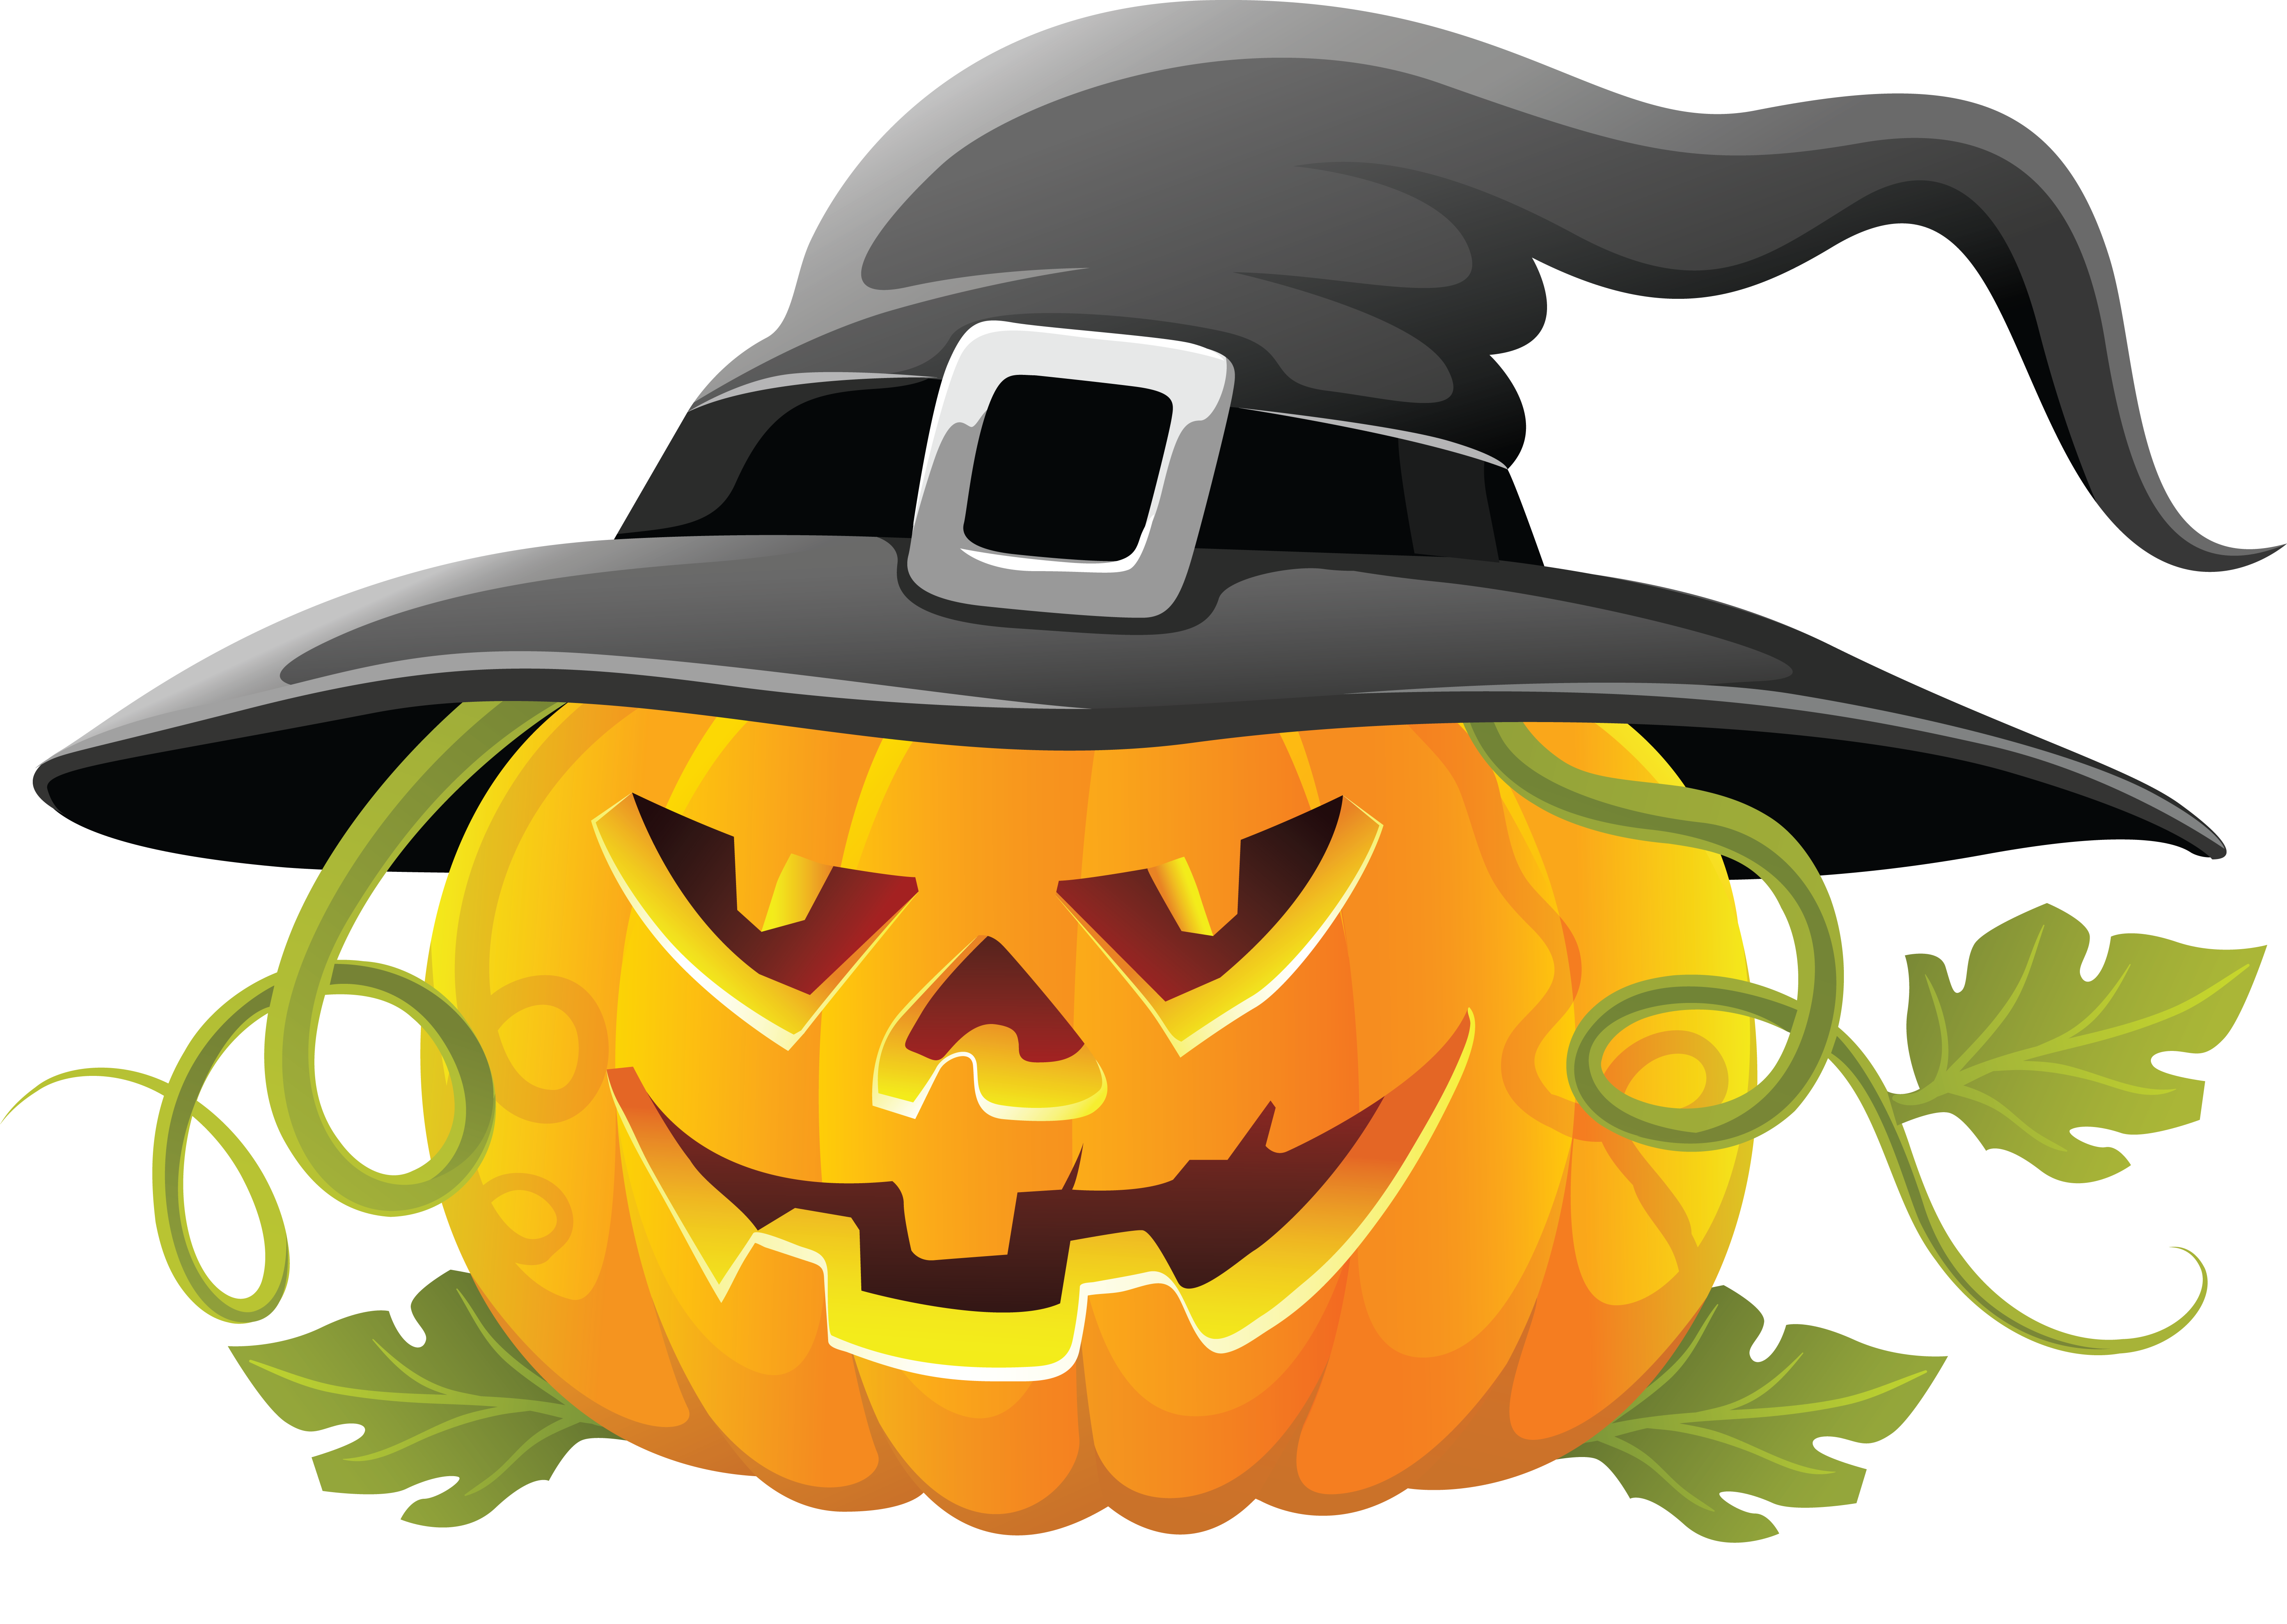 Large Transparent Halloween Pumpkin with Witch Hat Clipart?m=1375135200 